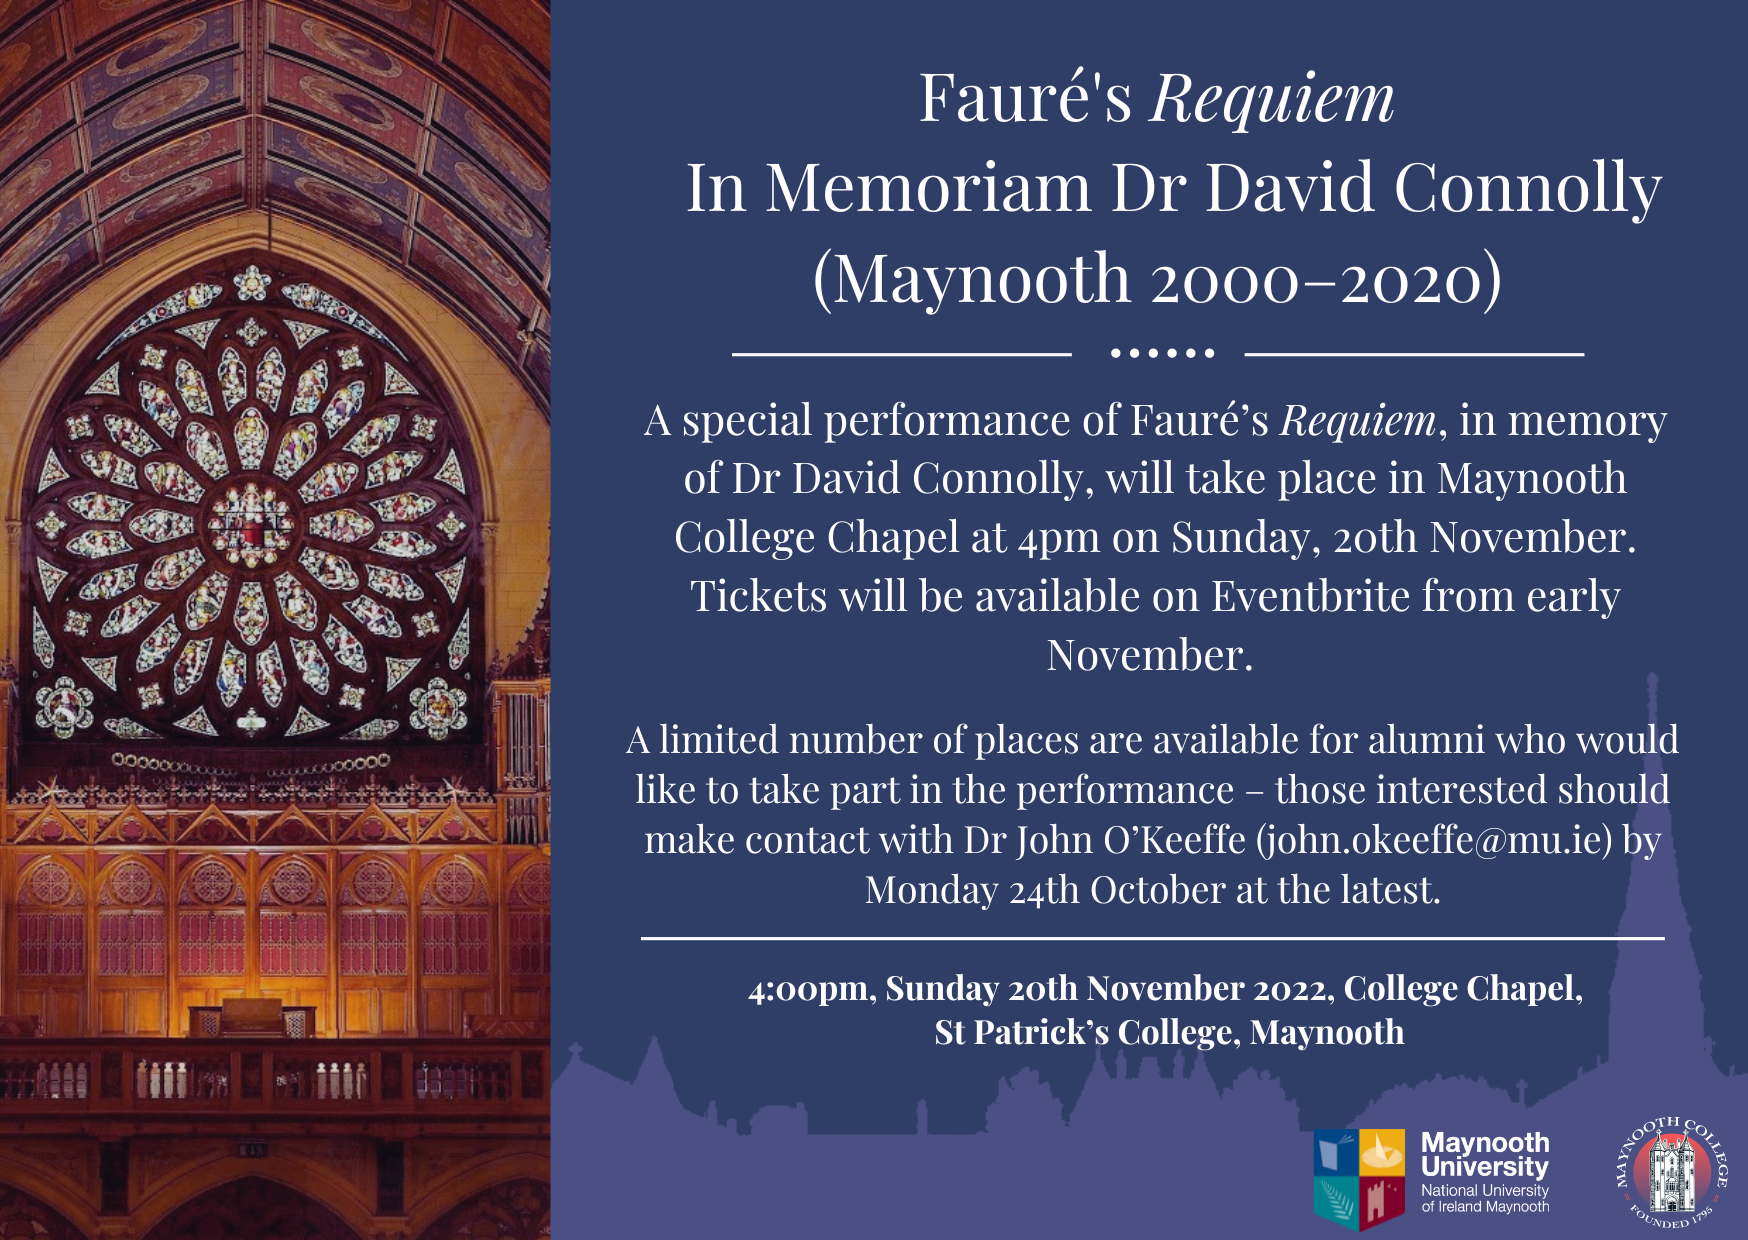 Fauré’s-Requiem-in-memory-of-Dr-David-Connolly-1.png#asset:13453